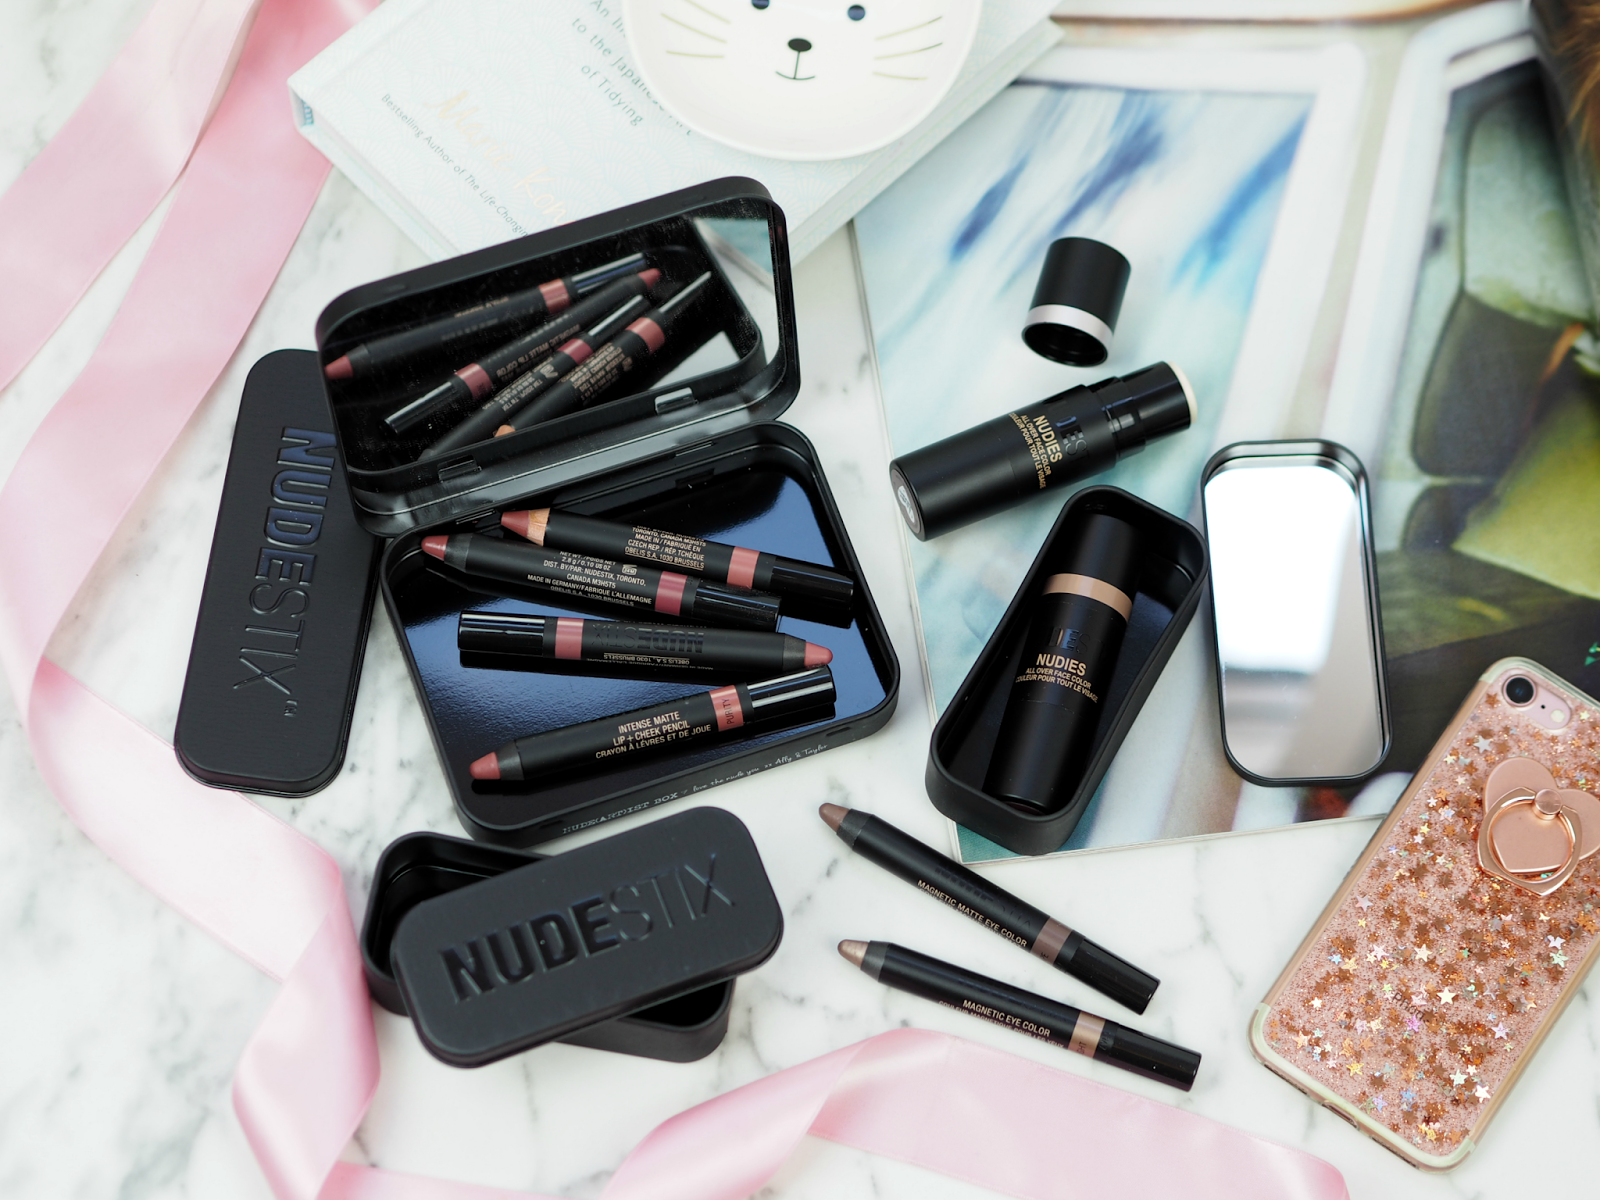 No-Makeup-Makeup Is Making A Comeback (And NudeStix Is An Effortless Way To Achieve It)